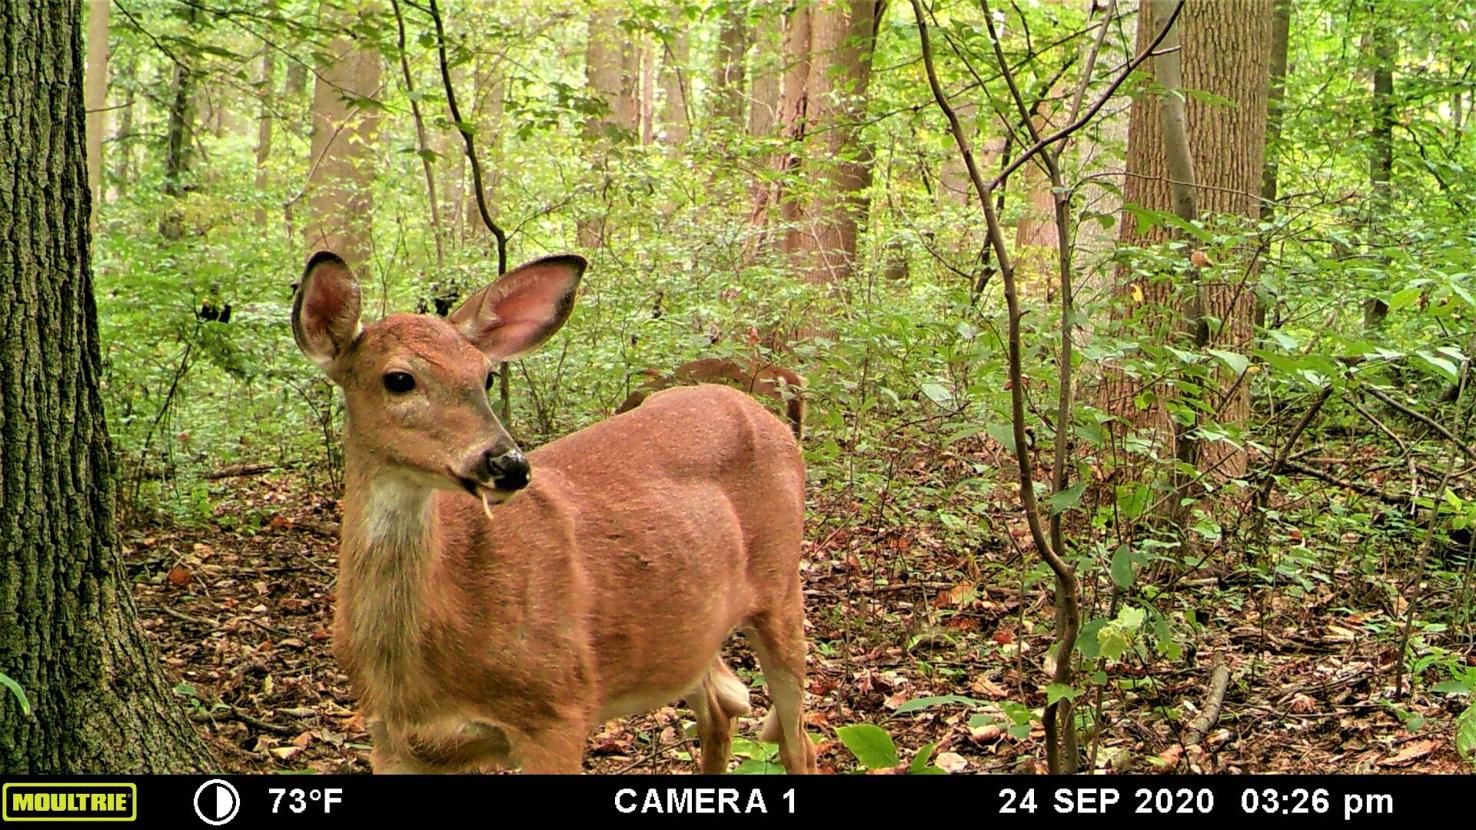 PA 2021-22 doe tag season is just around the corner and it has some new